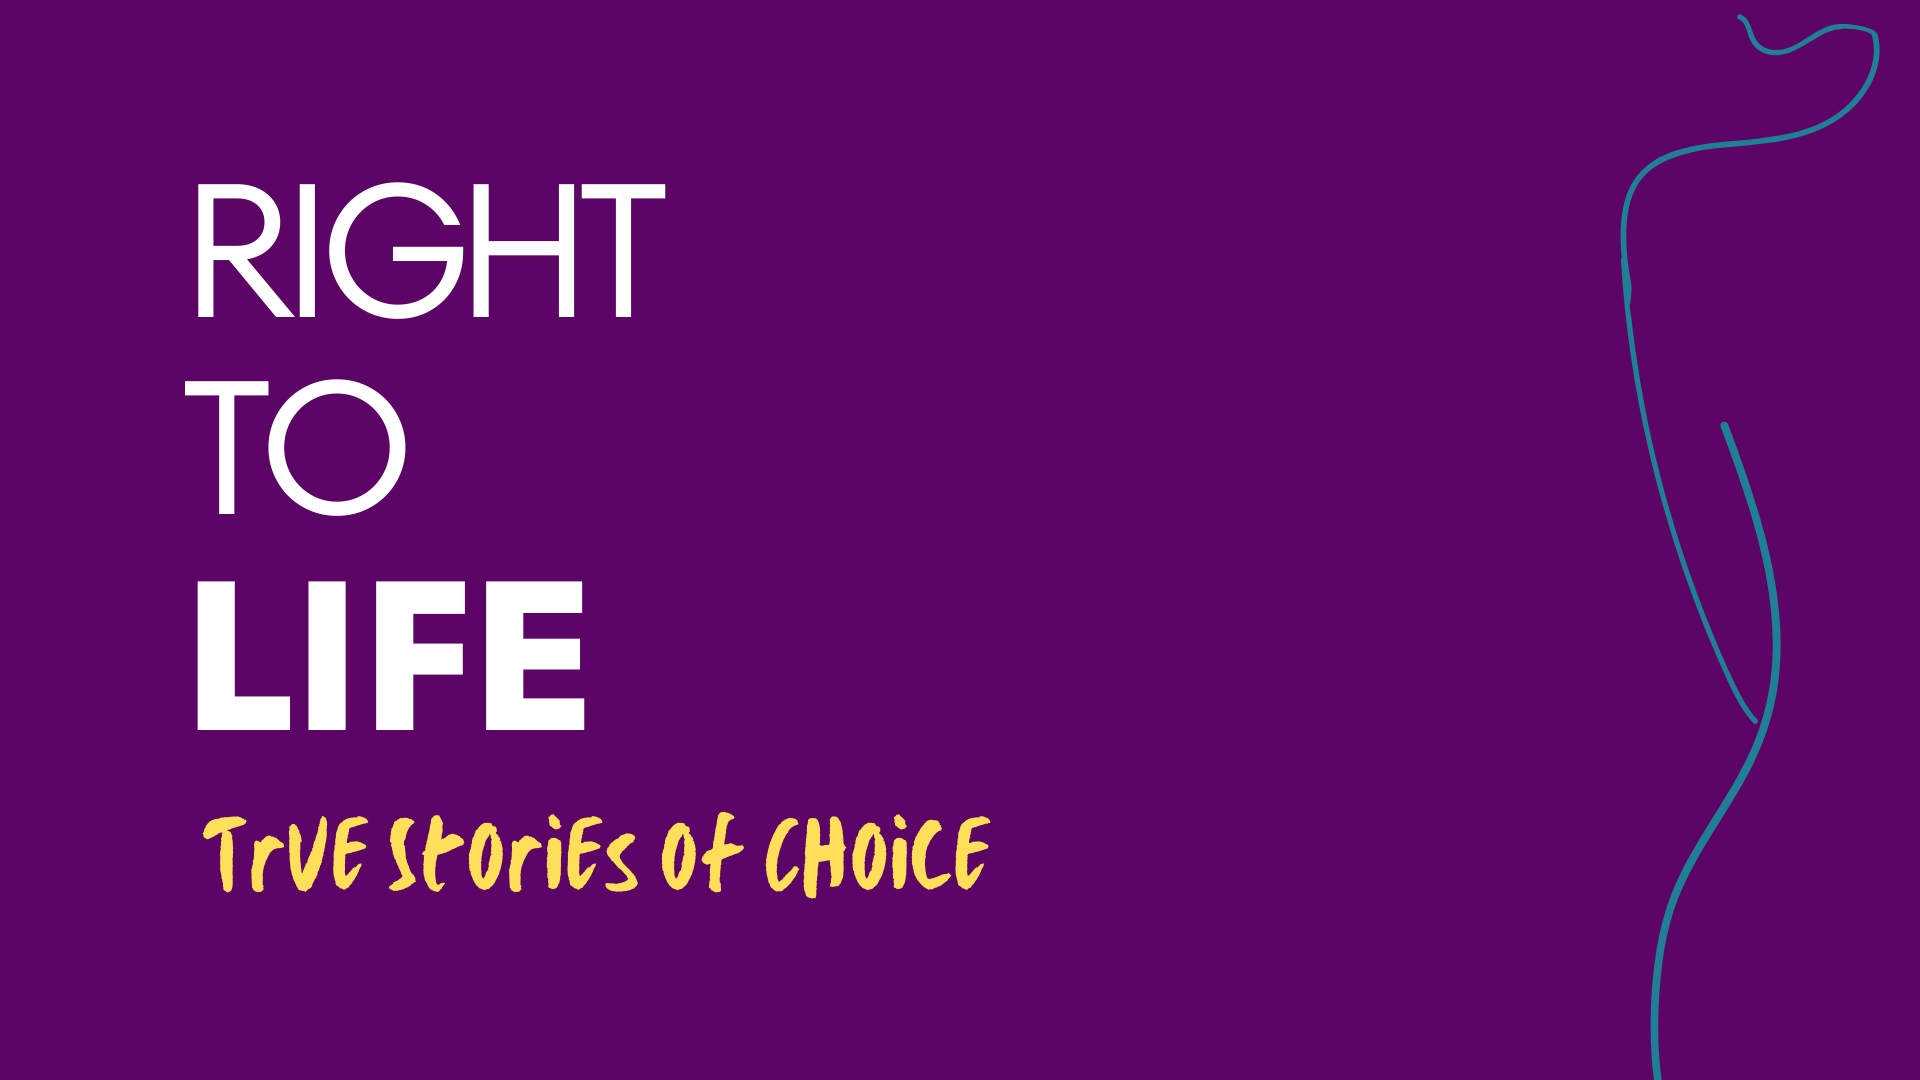 Right to Life Podcast